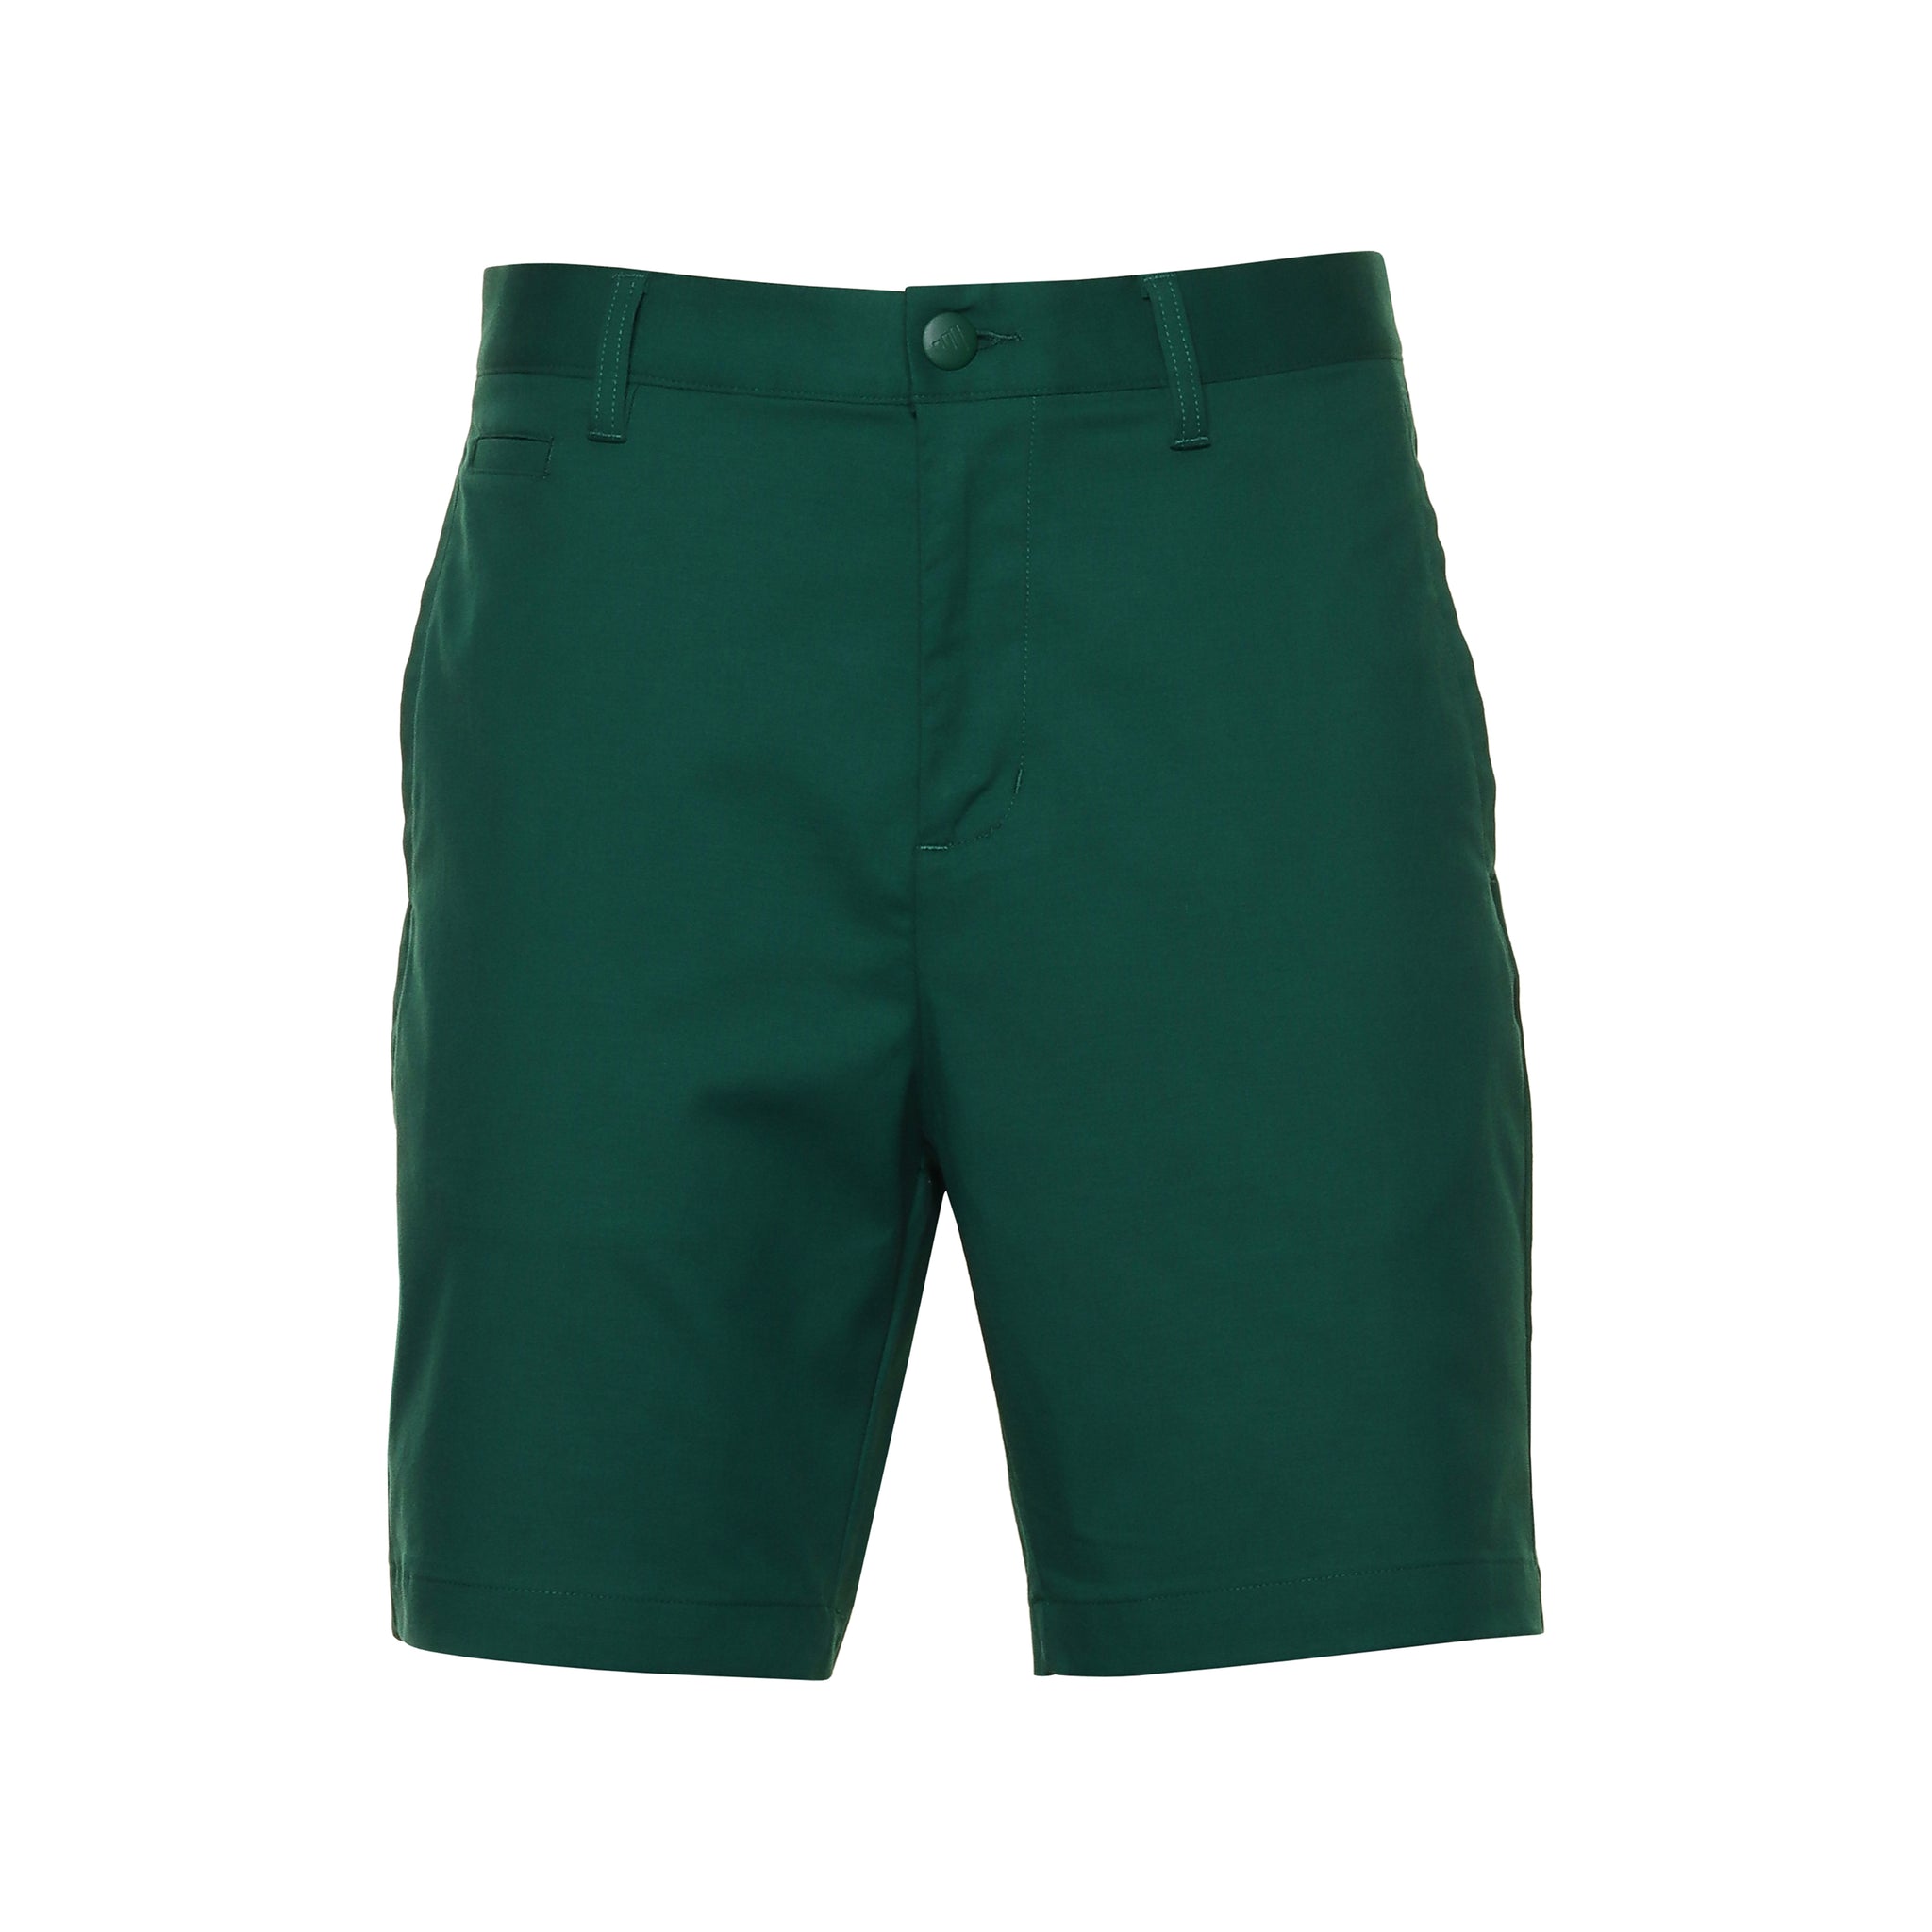 adidas-golf-go-to-five-pocket-shorts-in4259-collegiate-green